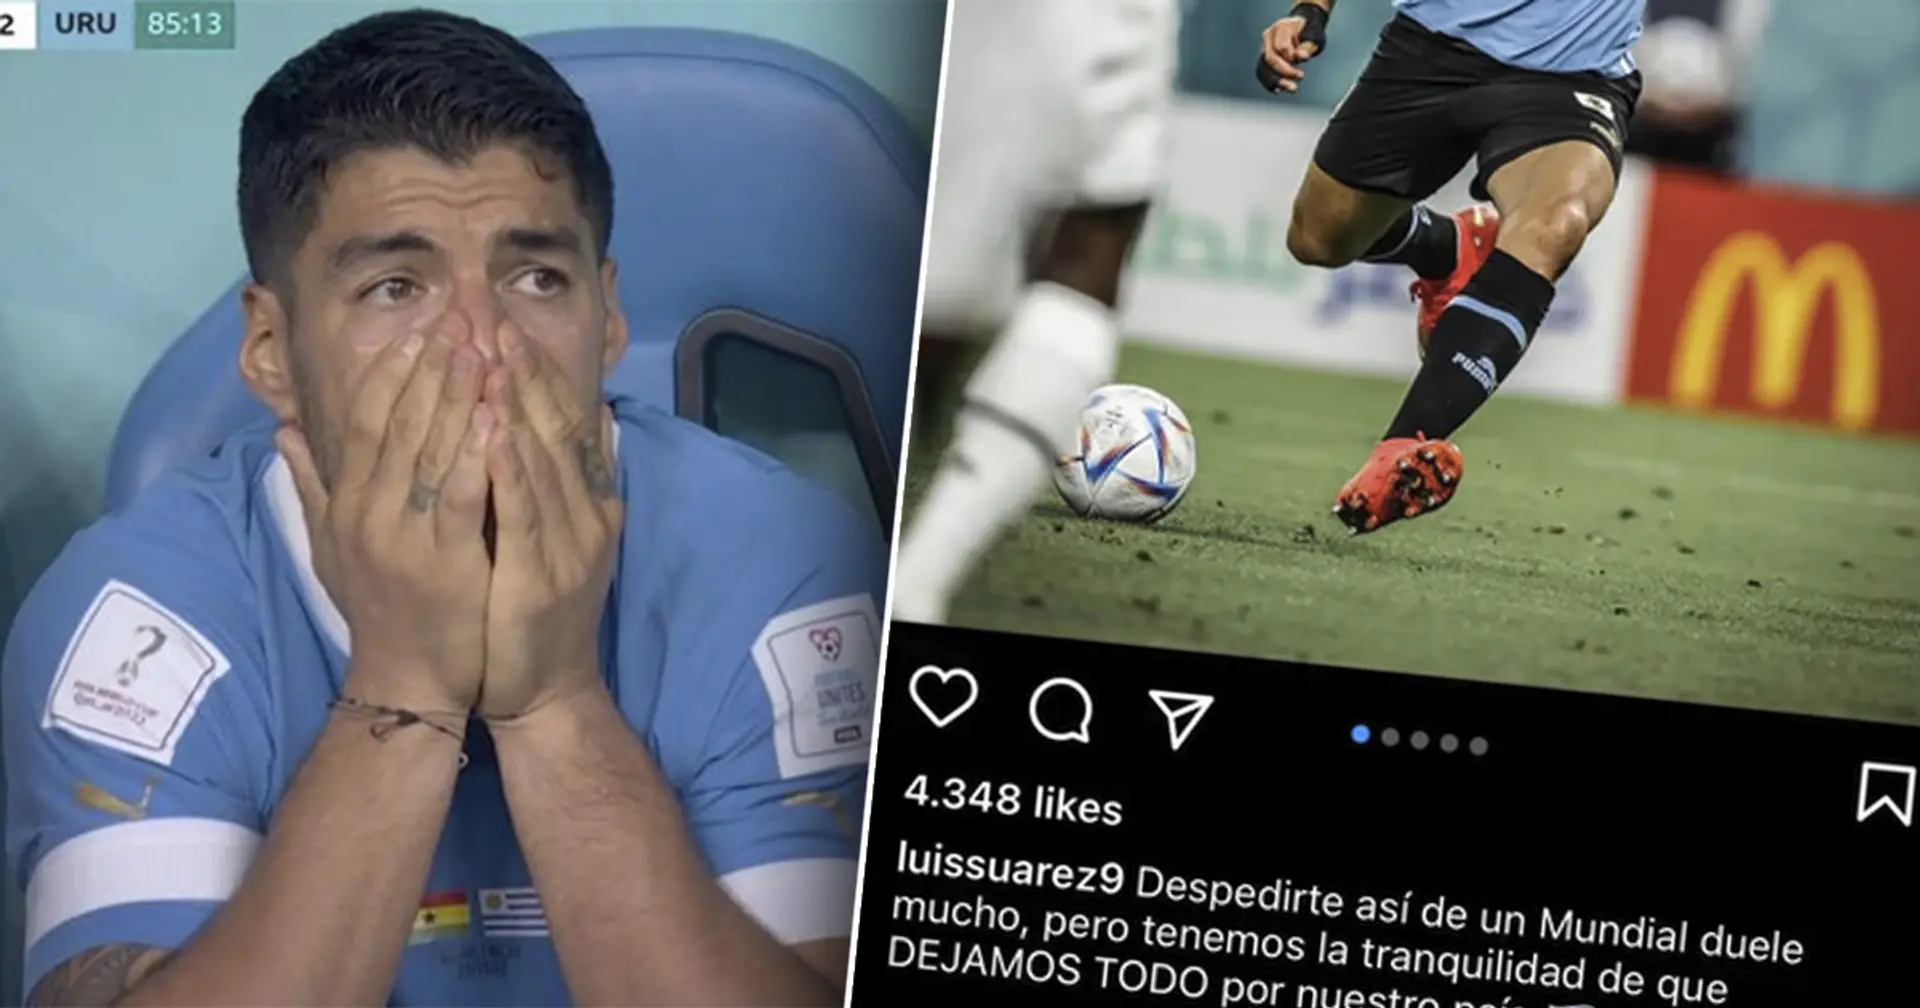 'We are not respected': Luis Suarez sends emotional message after World Cup elimination